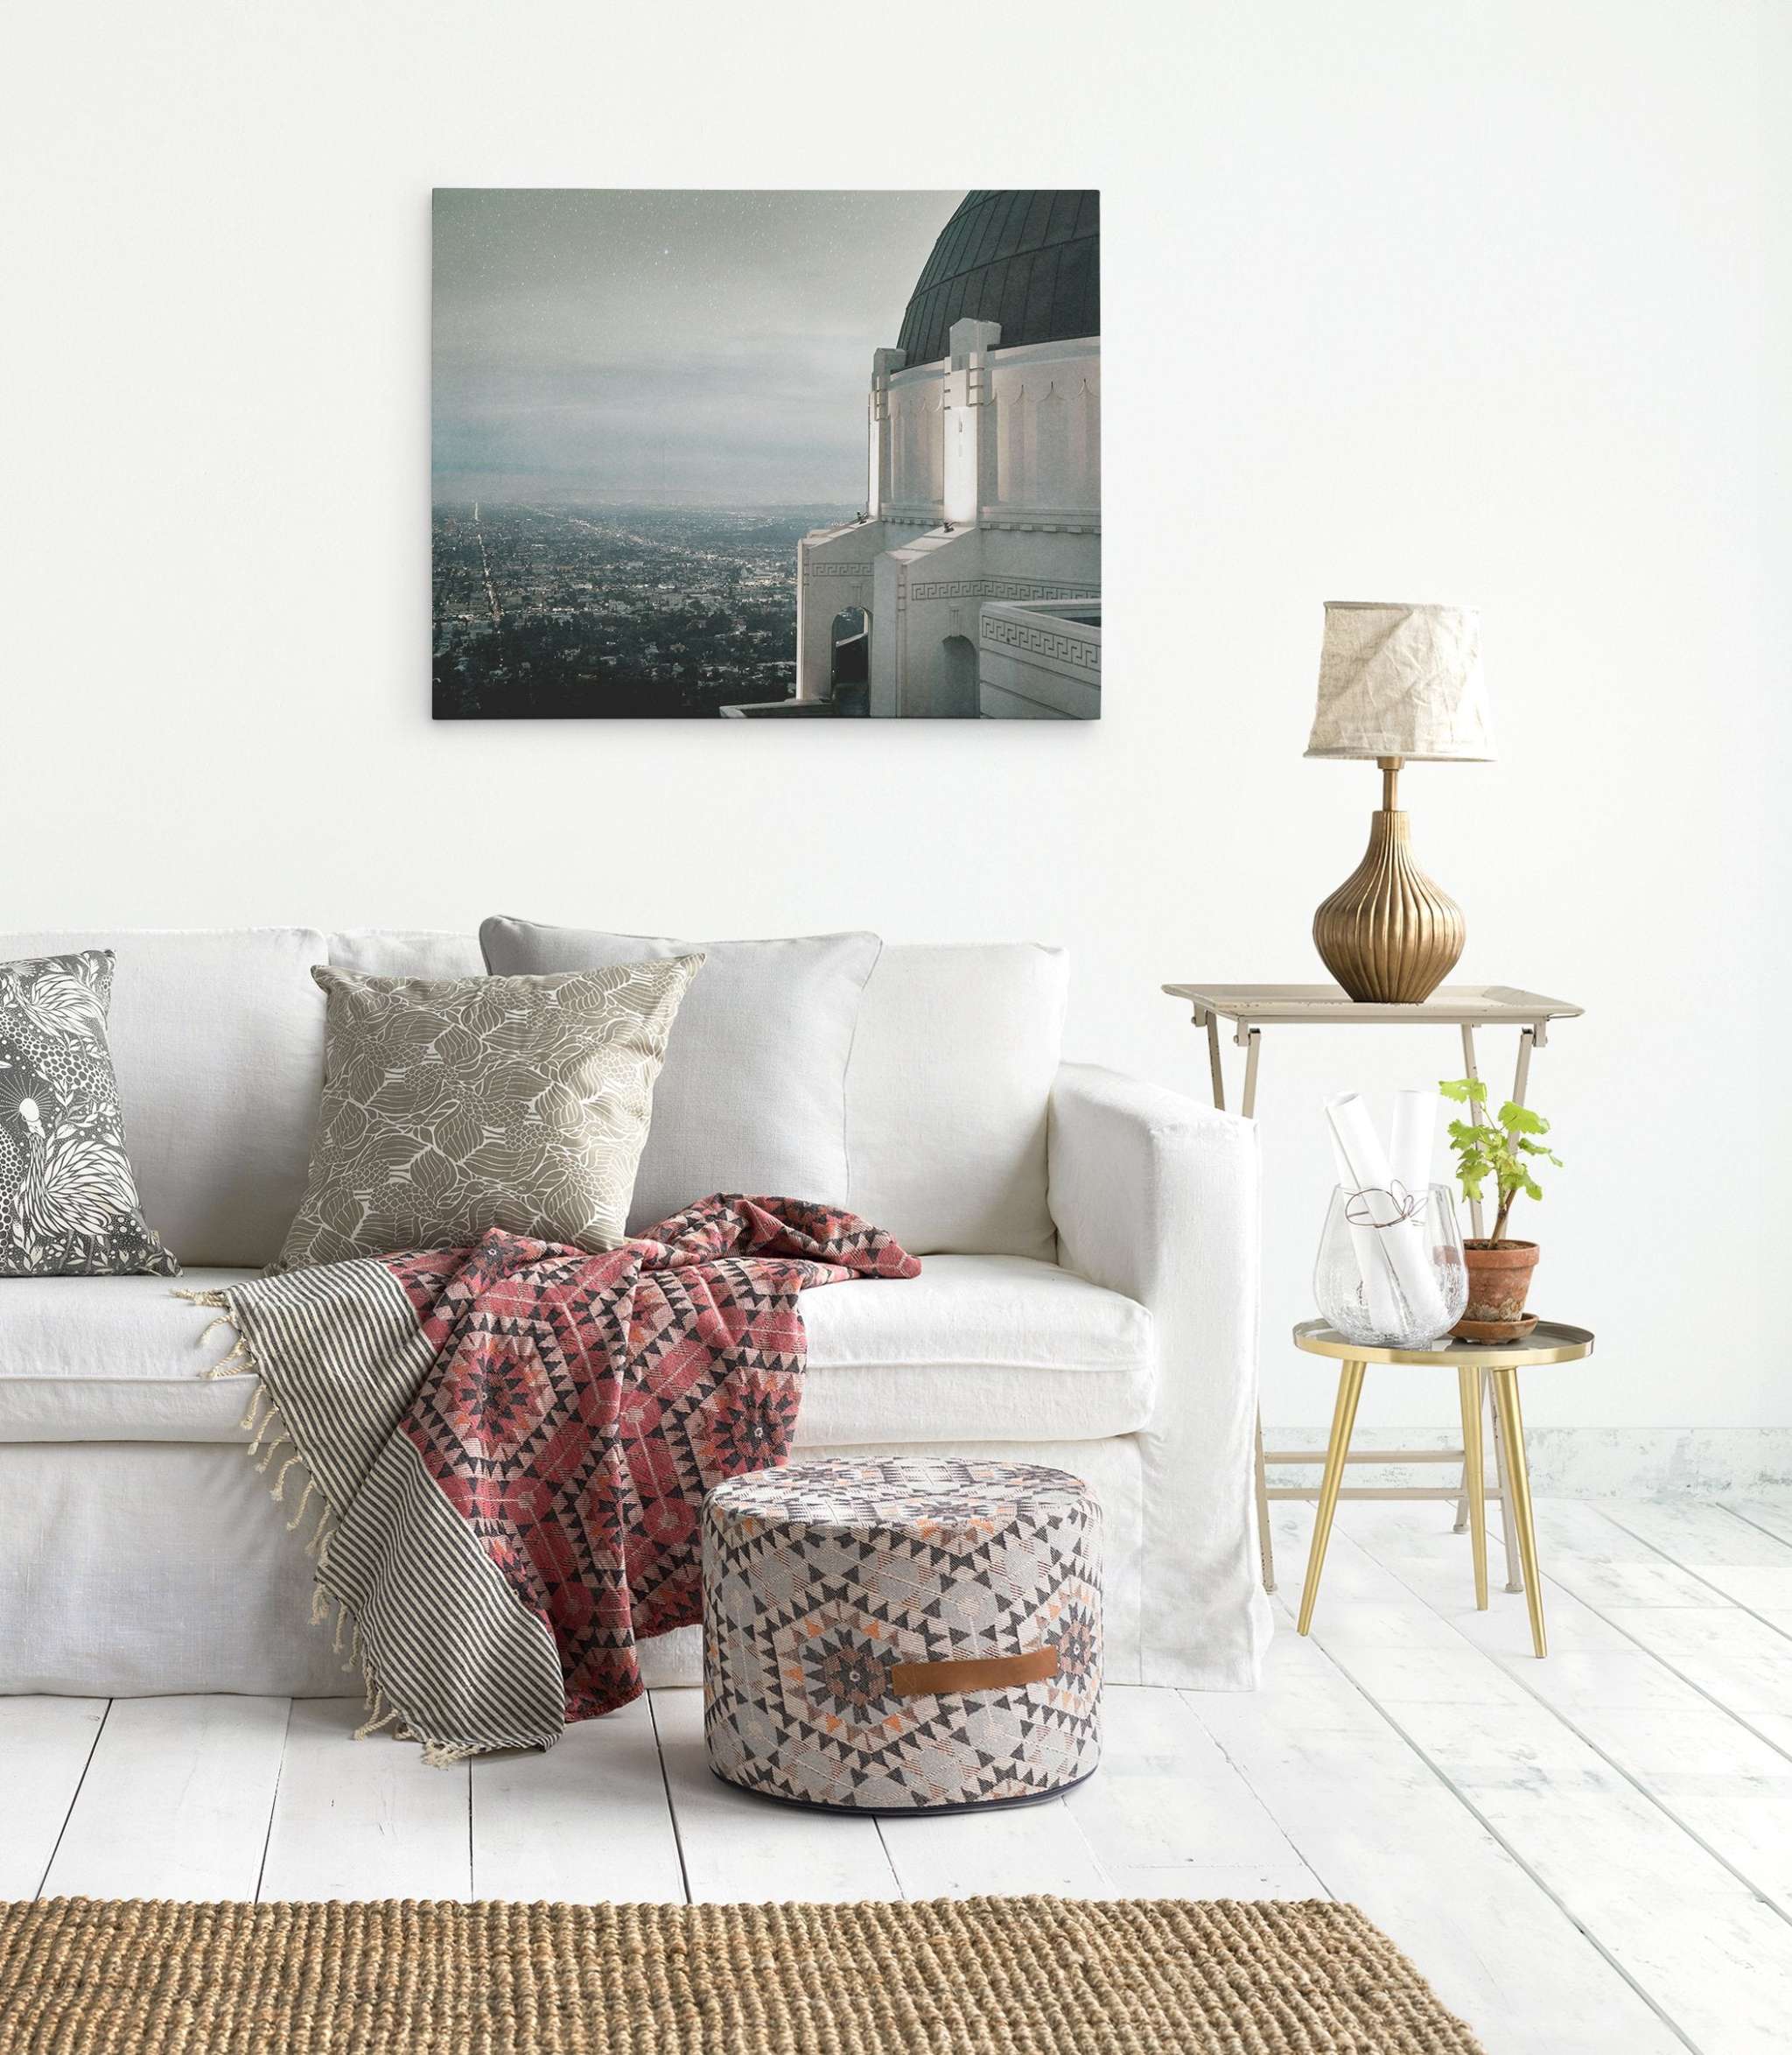 A modern living room features a white sofa adorned with patterned cushions and a red geometric throw blanket. A small gray ottoman and a side table with a gold lamp, glass vase, and plant are nearby. Los Angeles Griffith Observatory Canvas Wall Decor, &#39;The Sky At Night&#39; by Offley Green hangs on the white wall above the sofa.